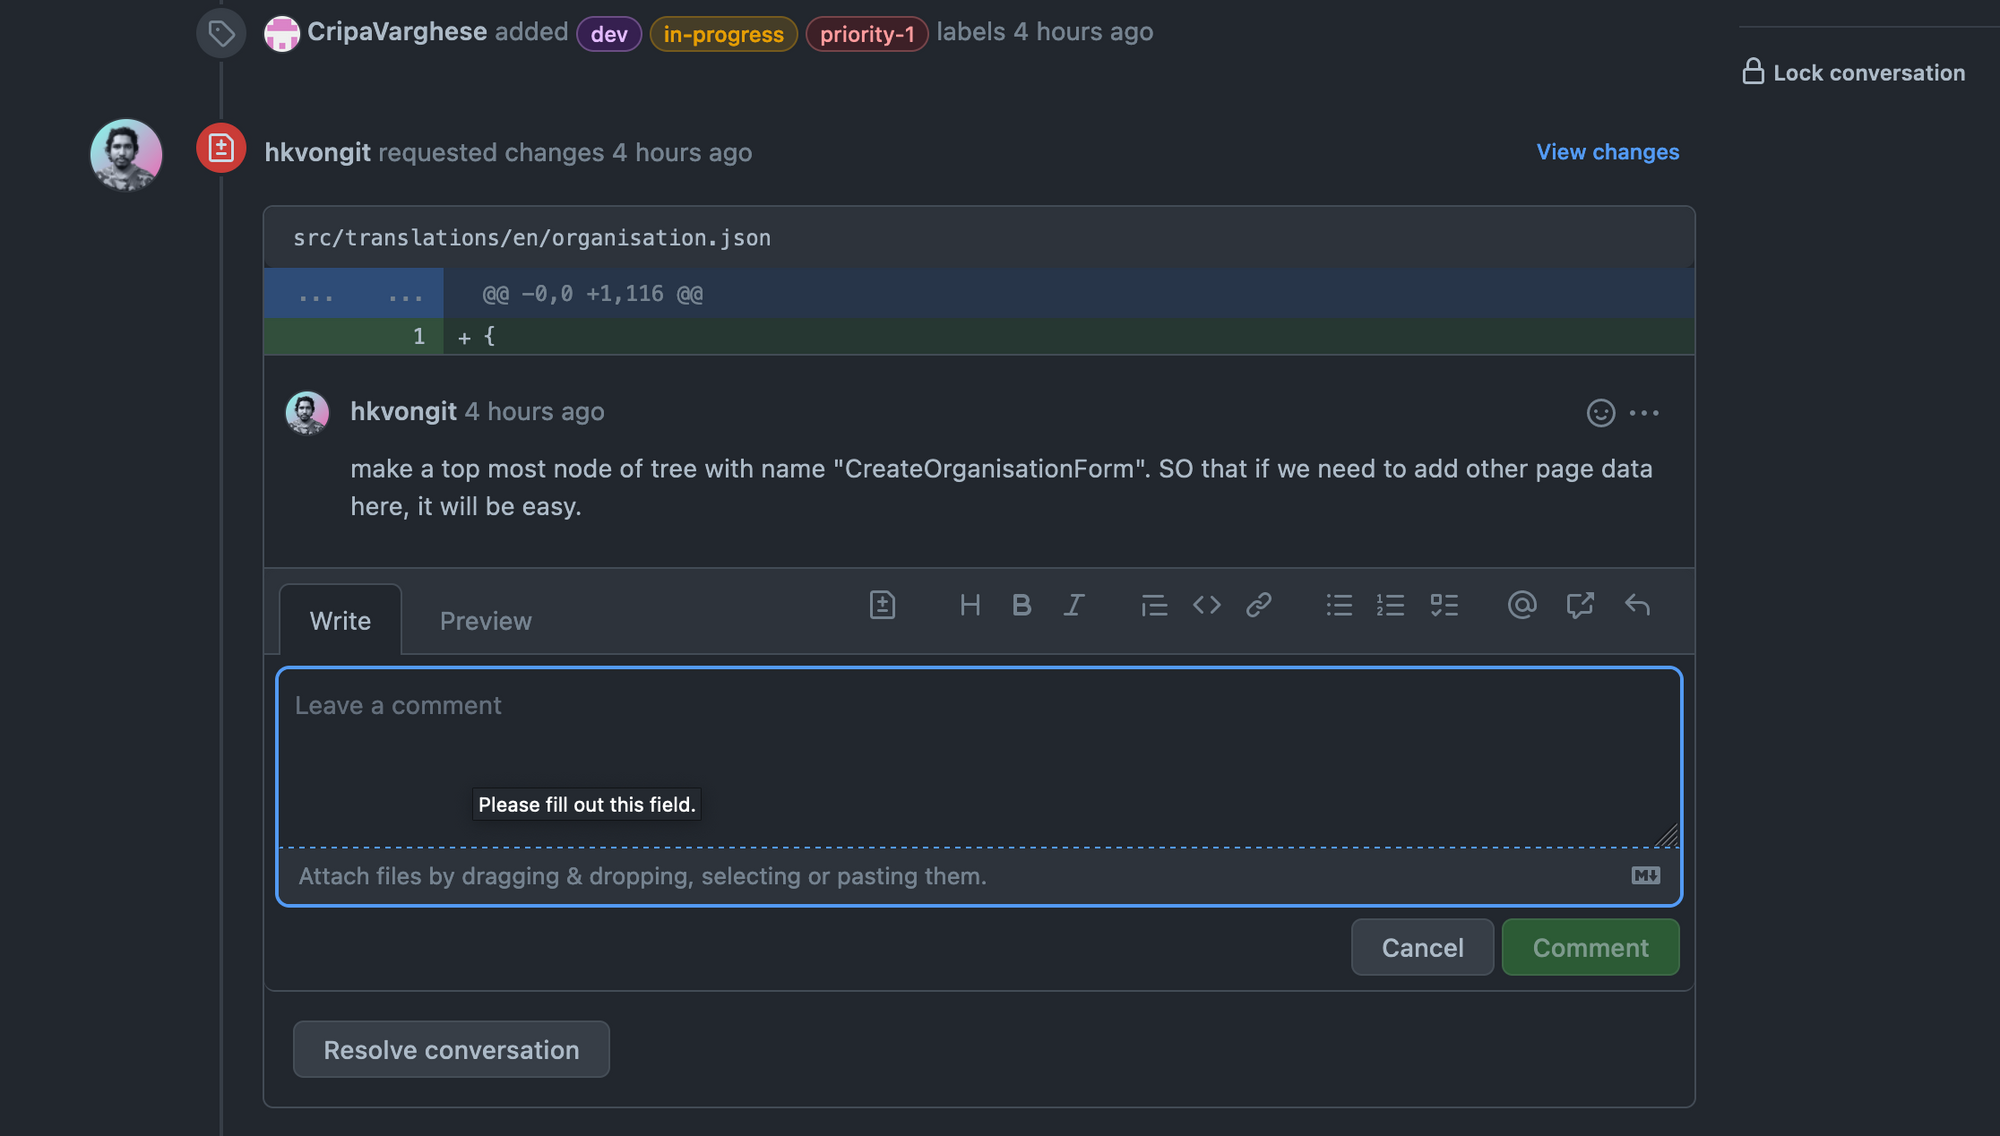 How to raise a Pull Request in Github